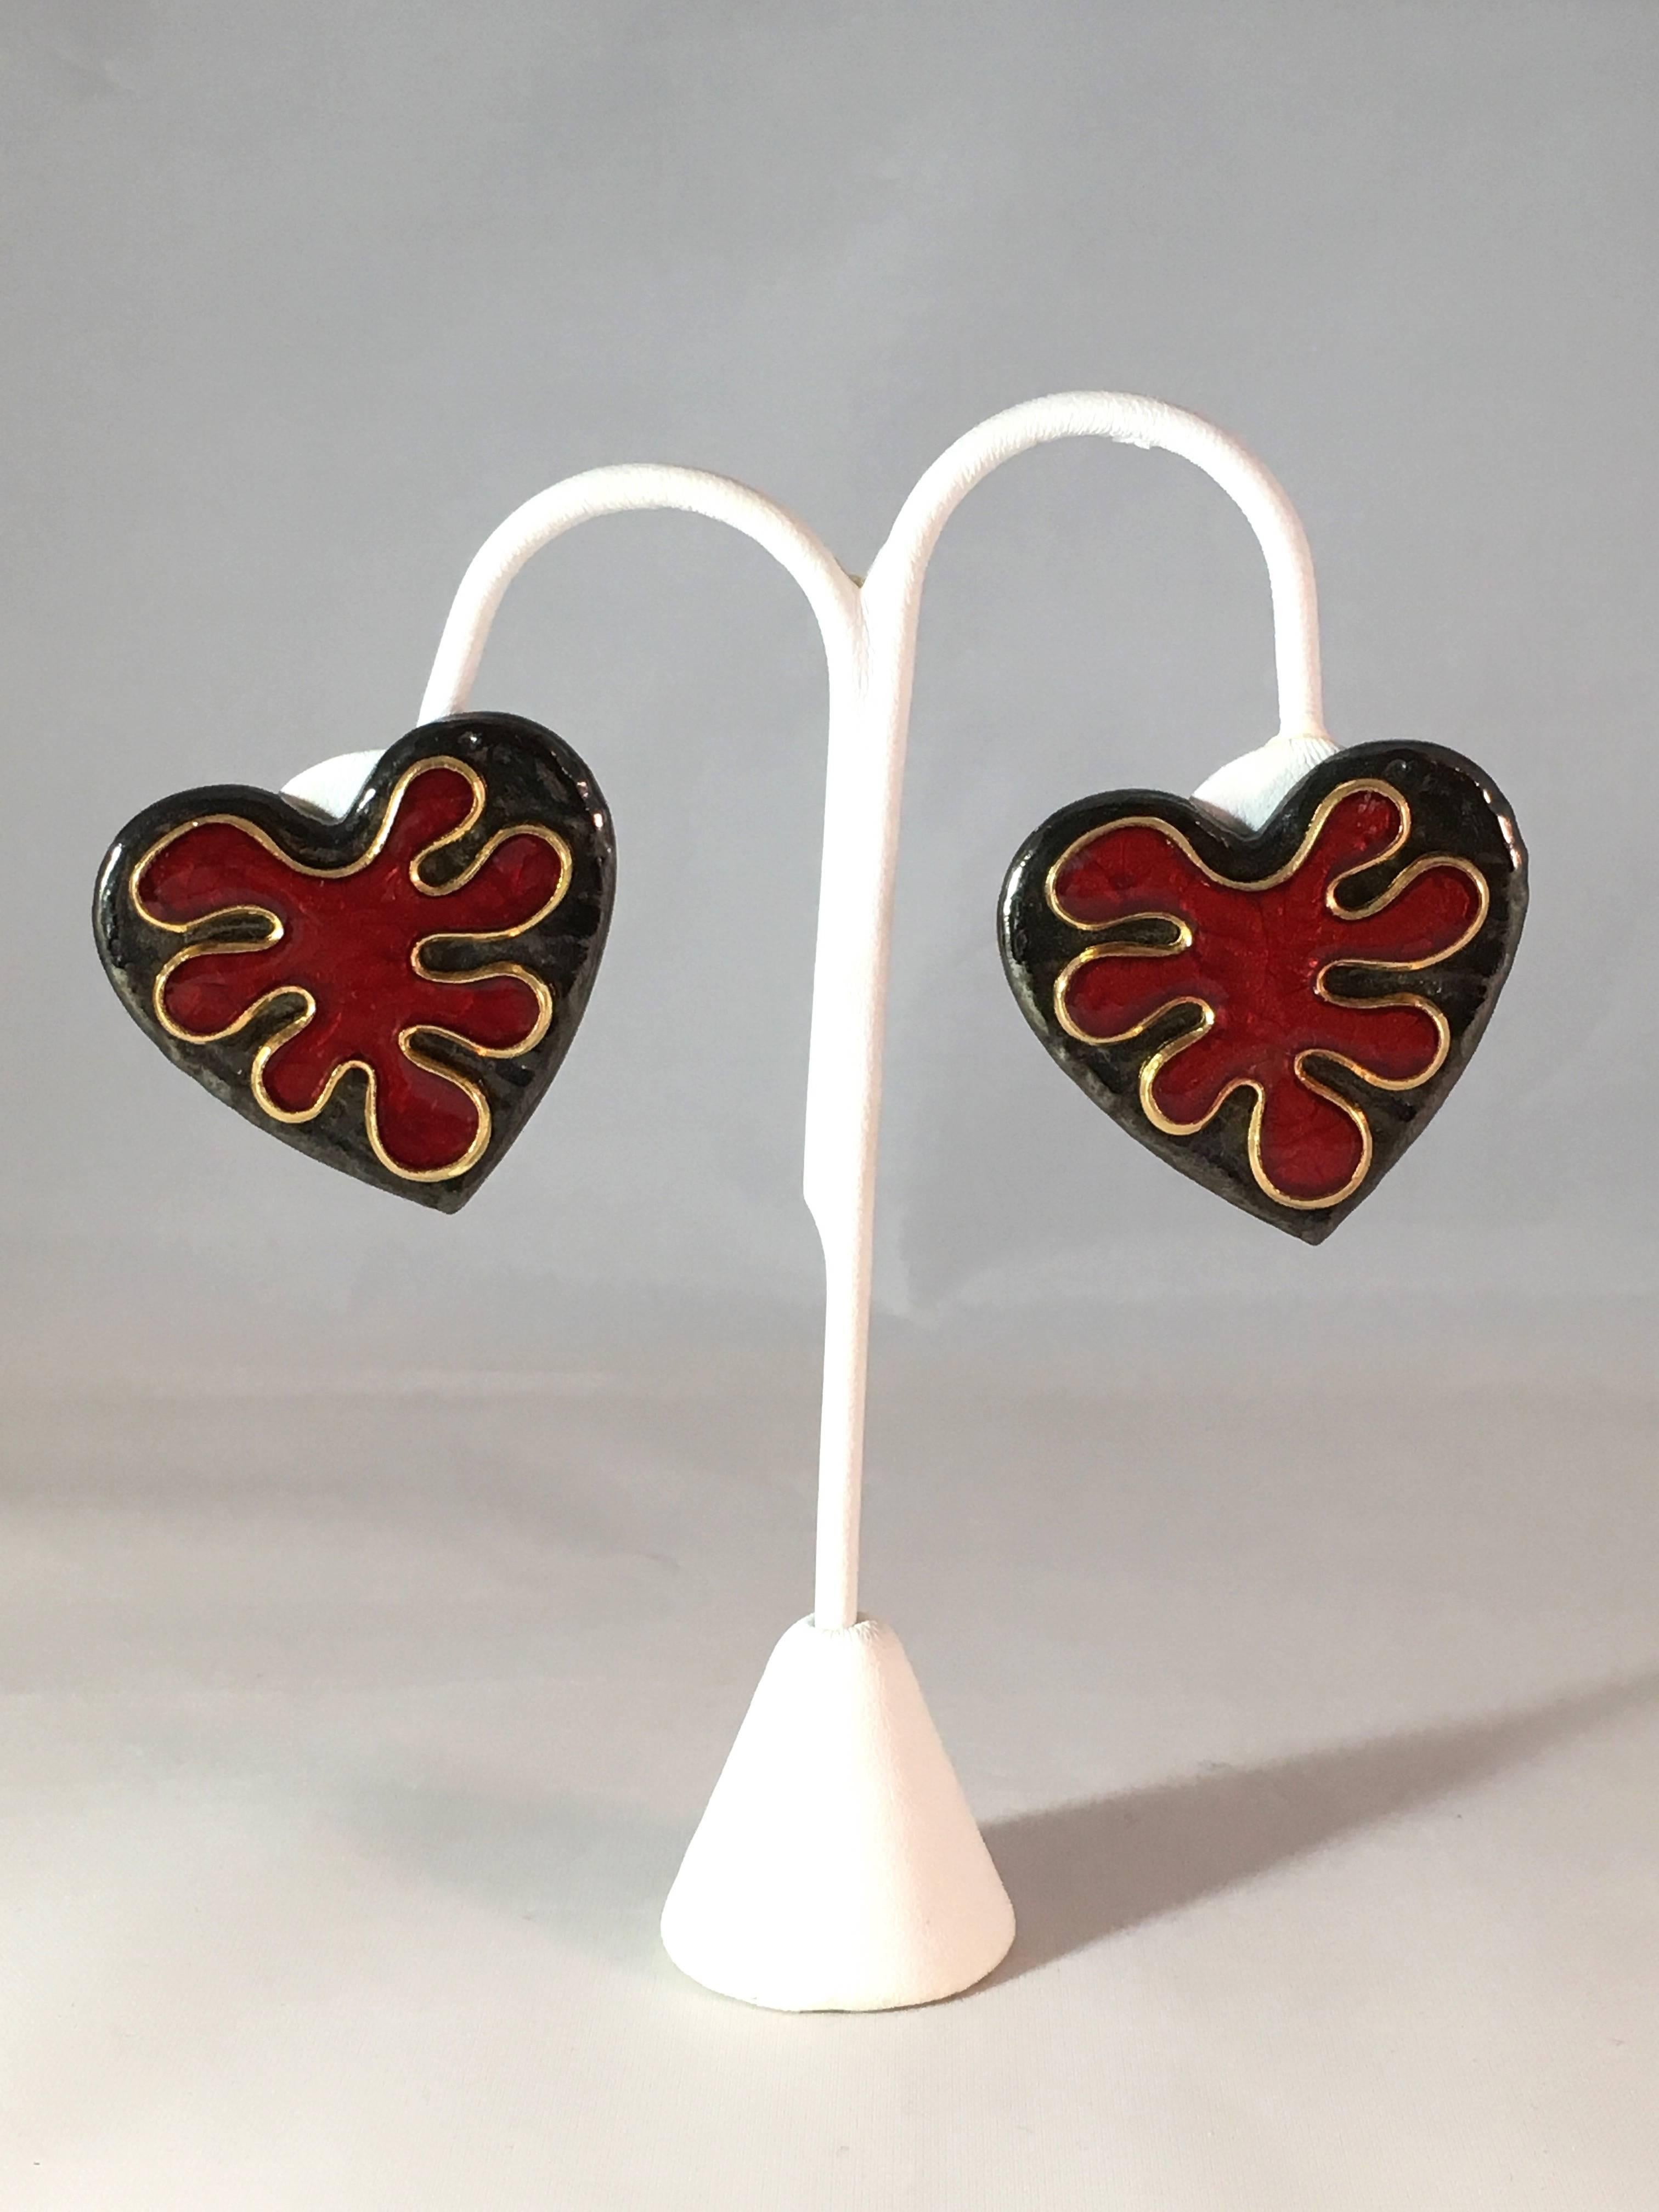 This is a pair of fabulous Yves Saint Laurent black and red heart clip-on earrings from the 1980s. The red portion in the center of the hearts look like Matisse cut-outs. The earrings are signed 'YSL' on the back of the clips and marked 'YSL' on the